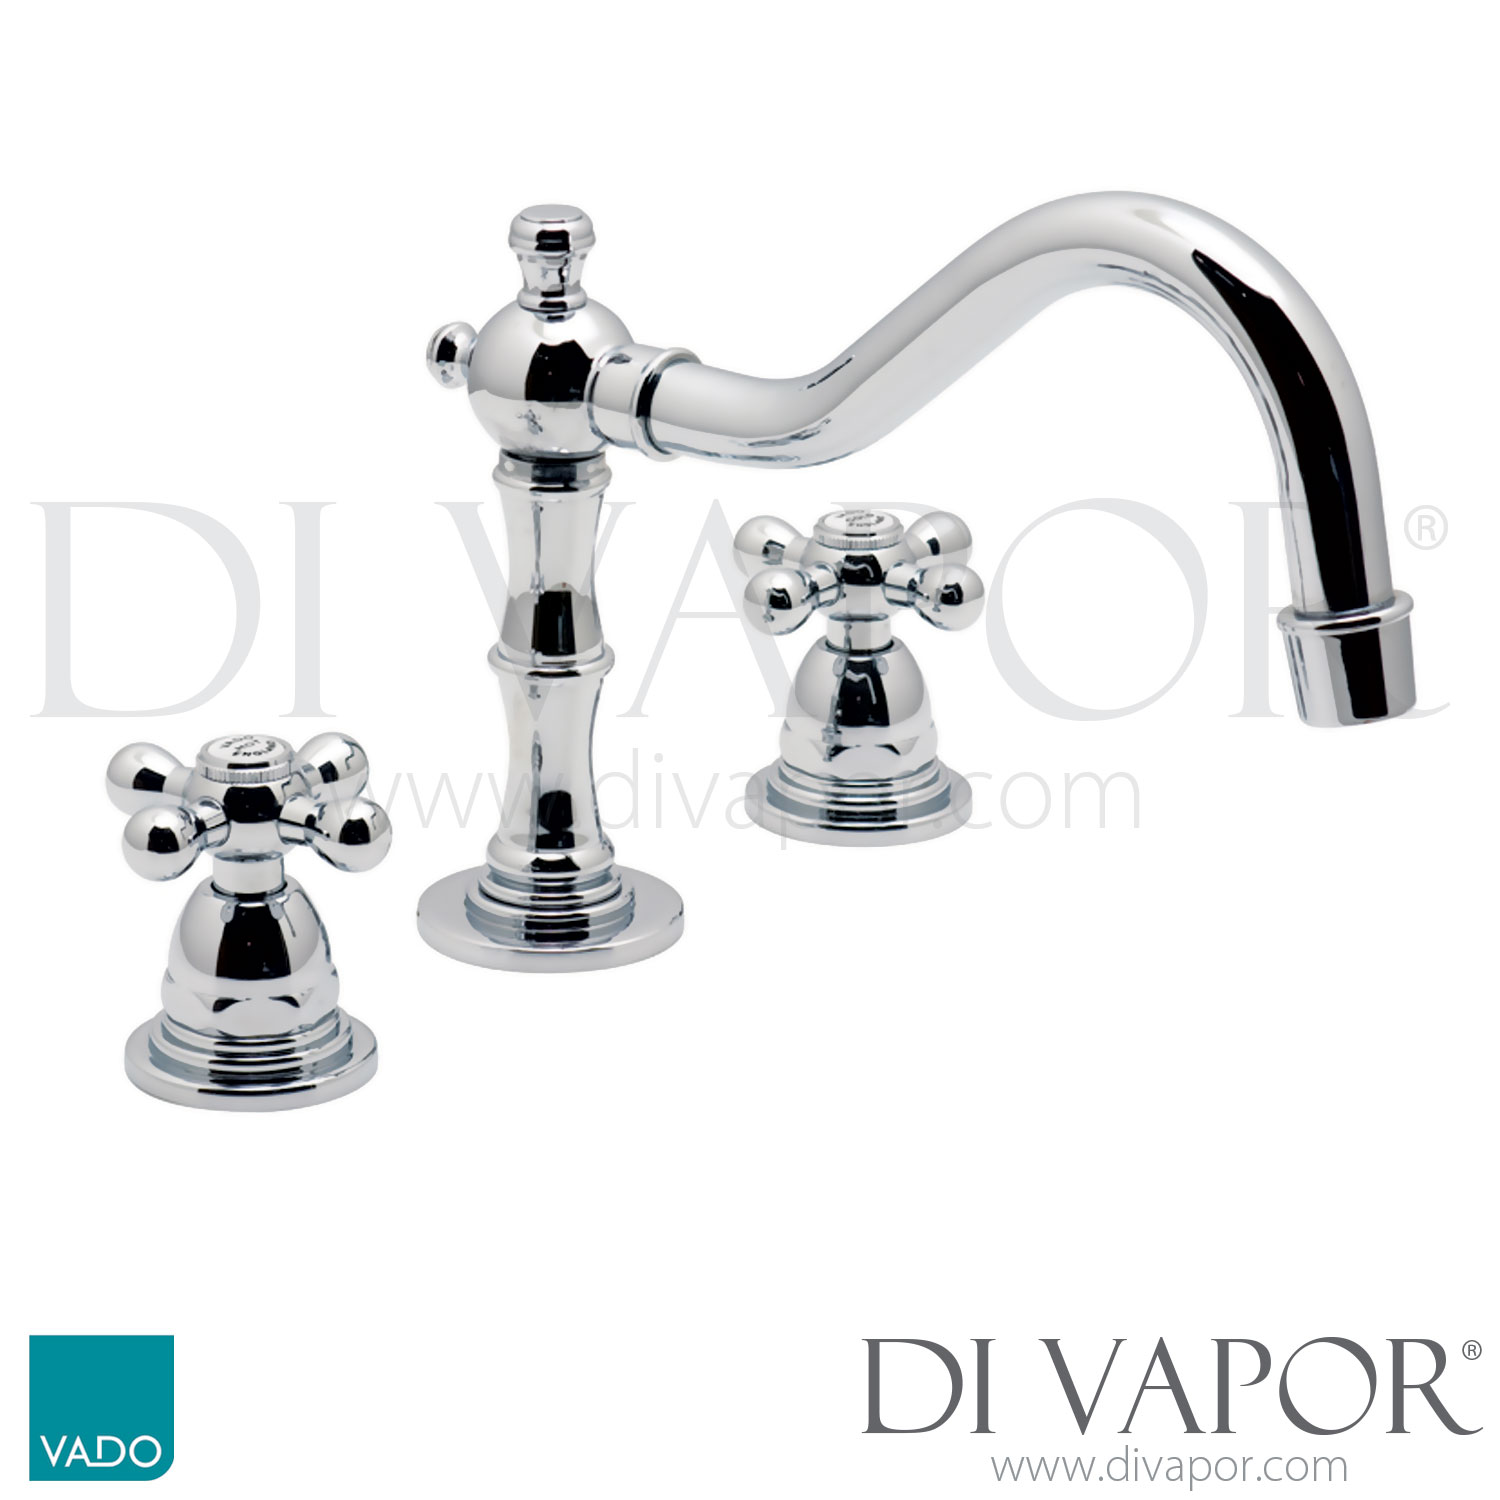 Vado Vic 101 Cd C P Victoriana 3 Hole Basin Tap Mixer Deck Mounted Without Pop Up Waste Spare Parts